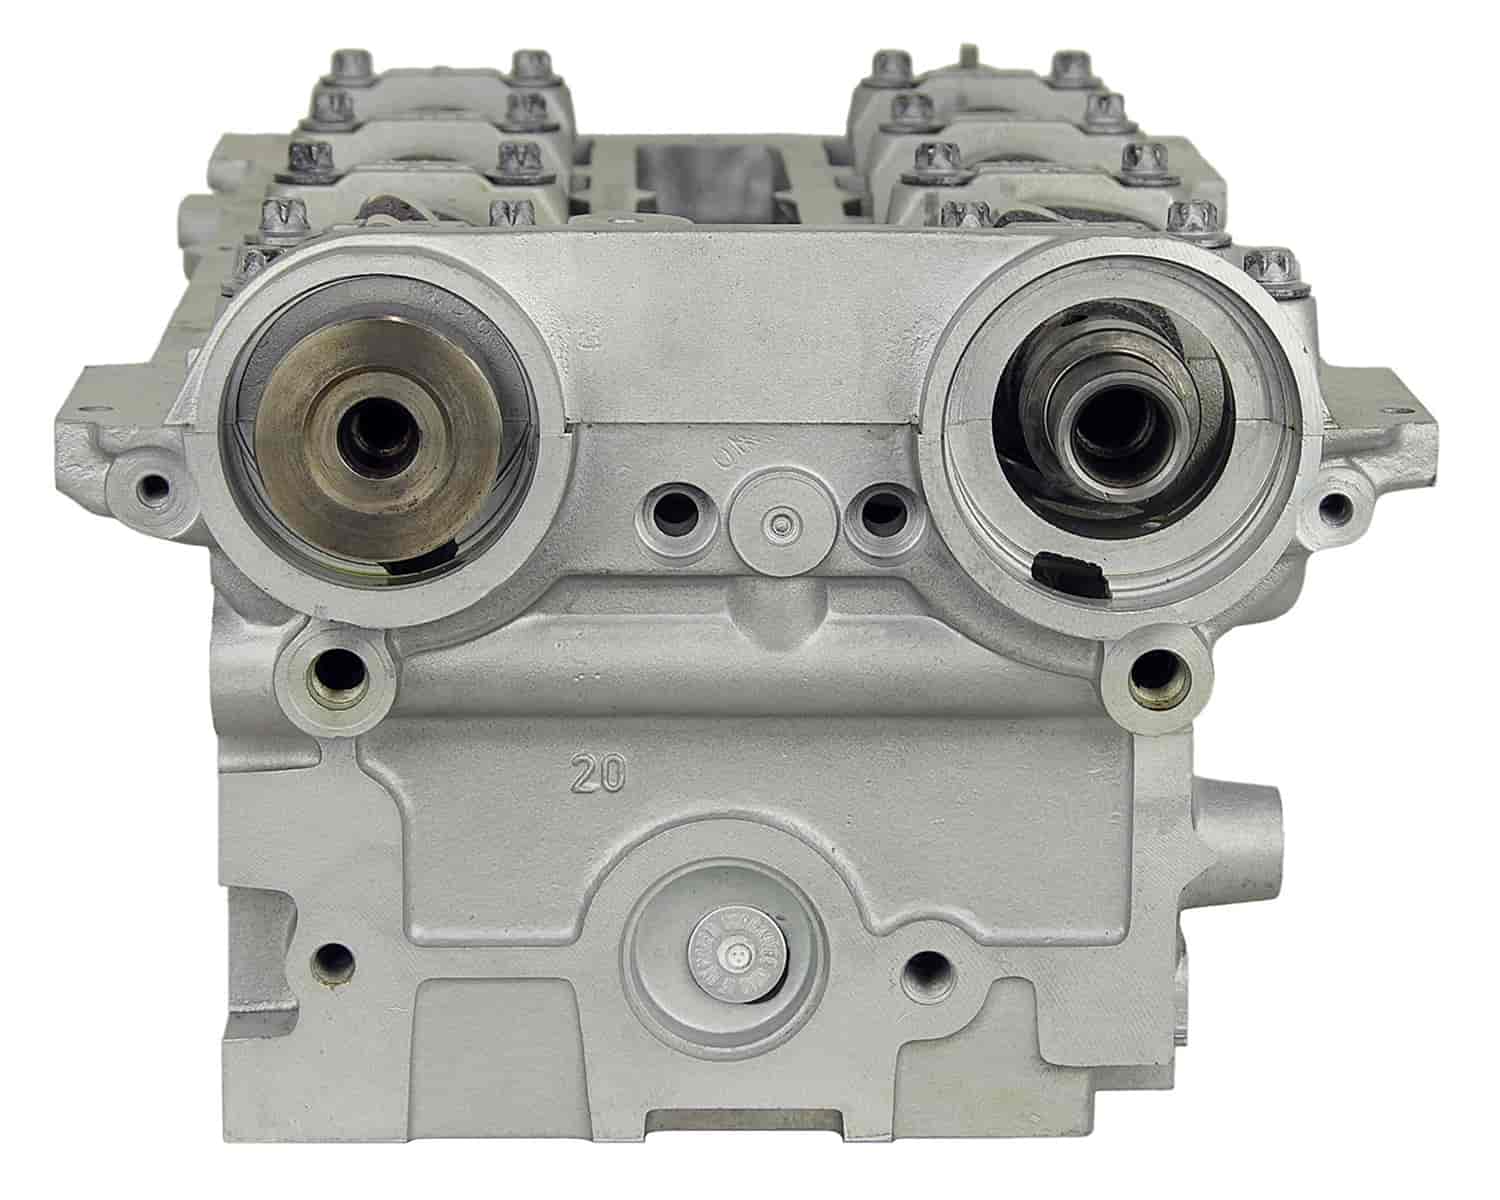 Remanufactured Cylinder Head for 1997-1999 Ford/Mercury with 2.0L L4